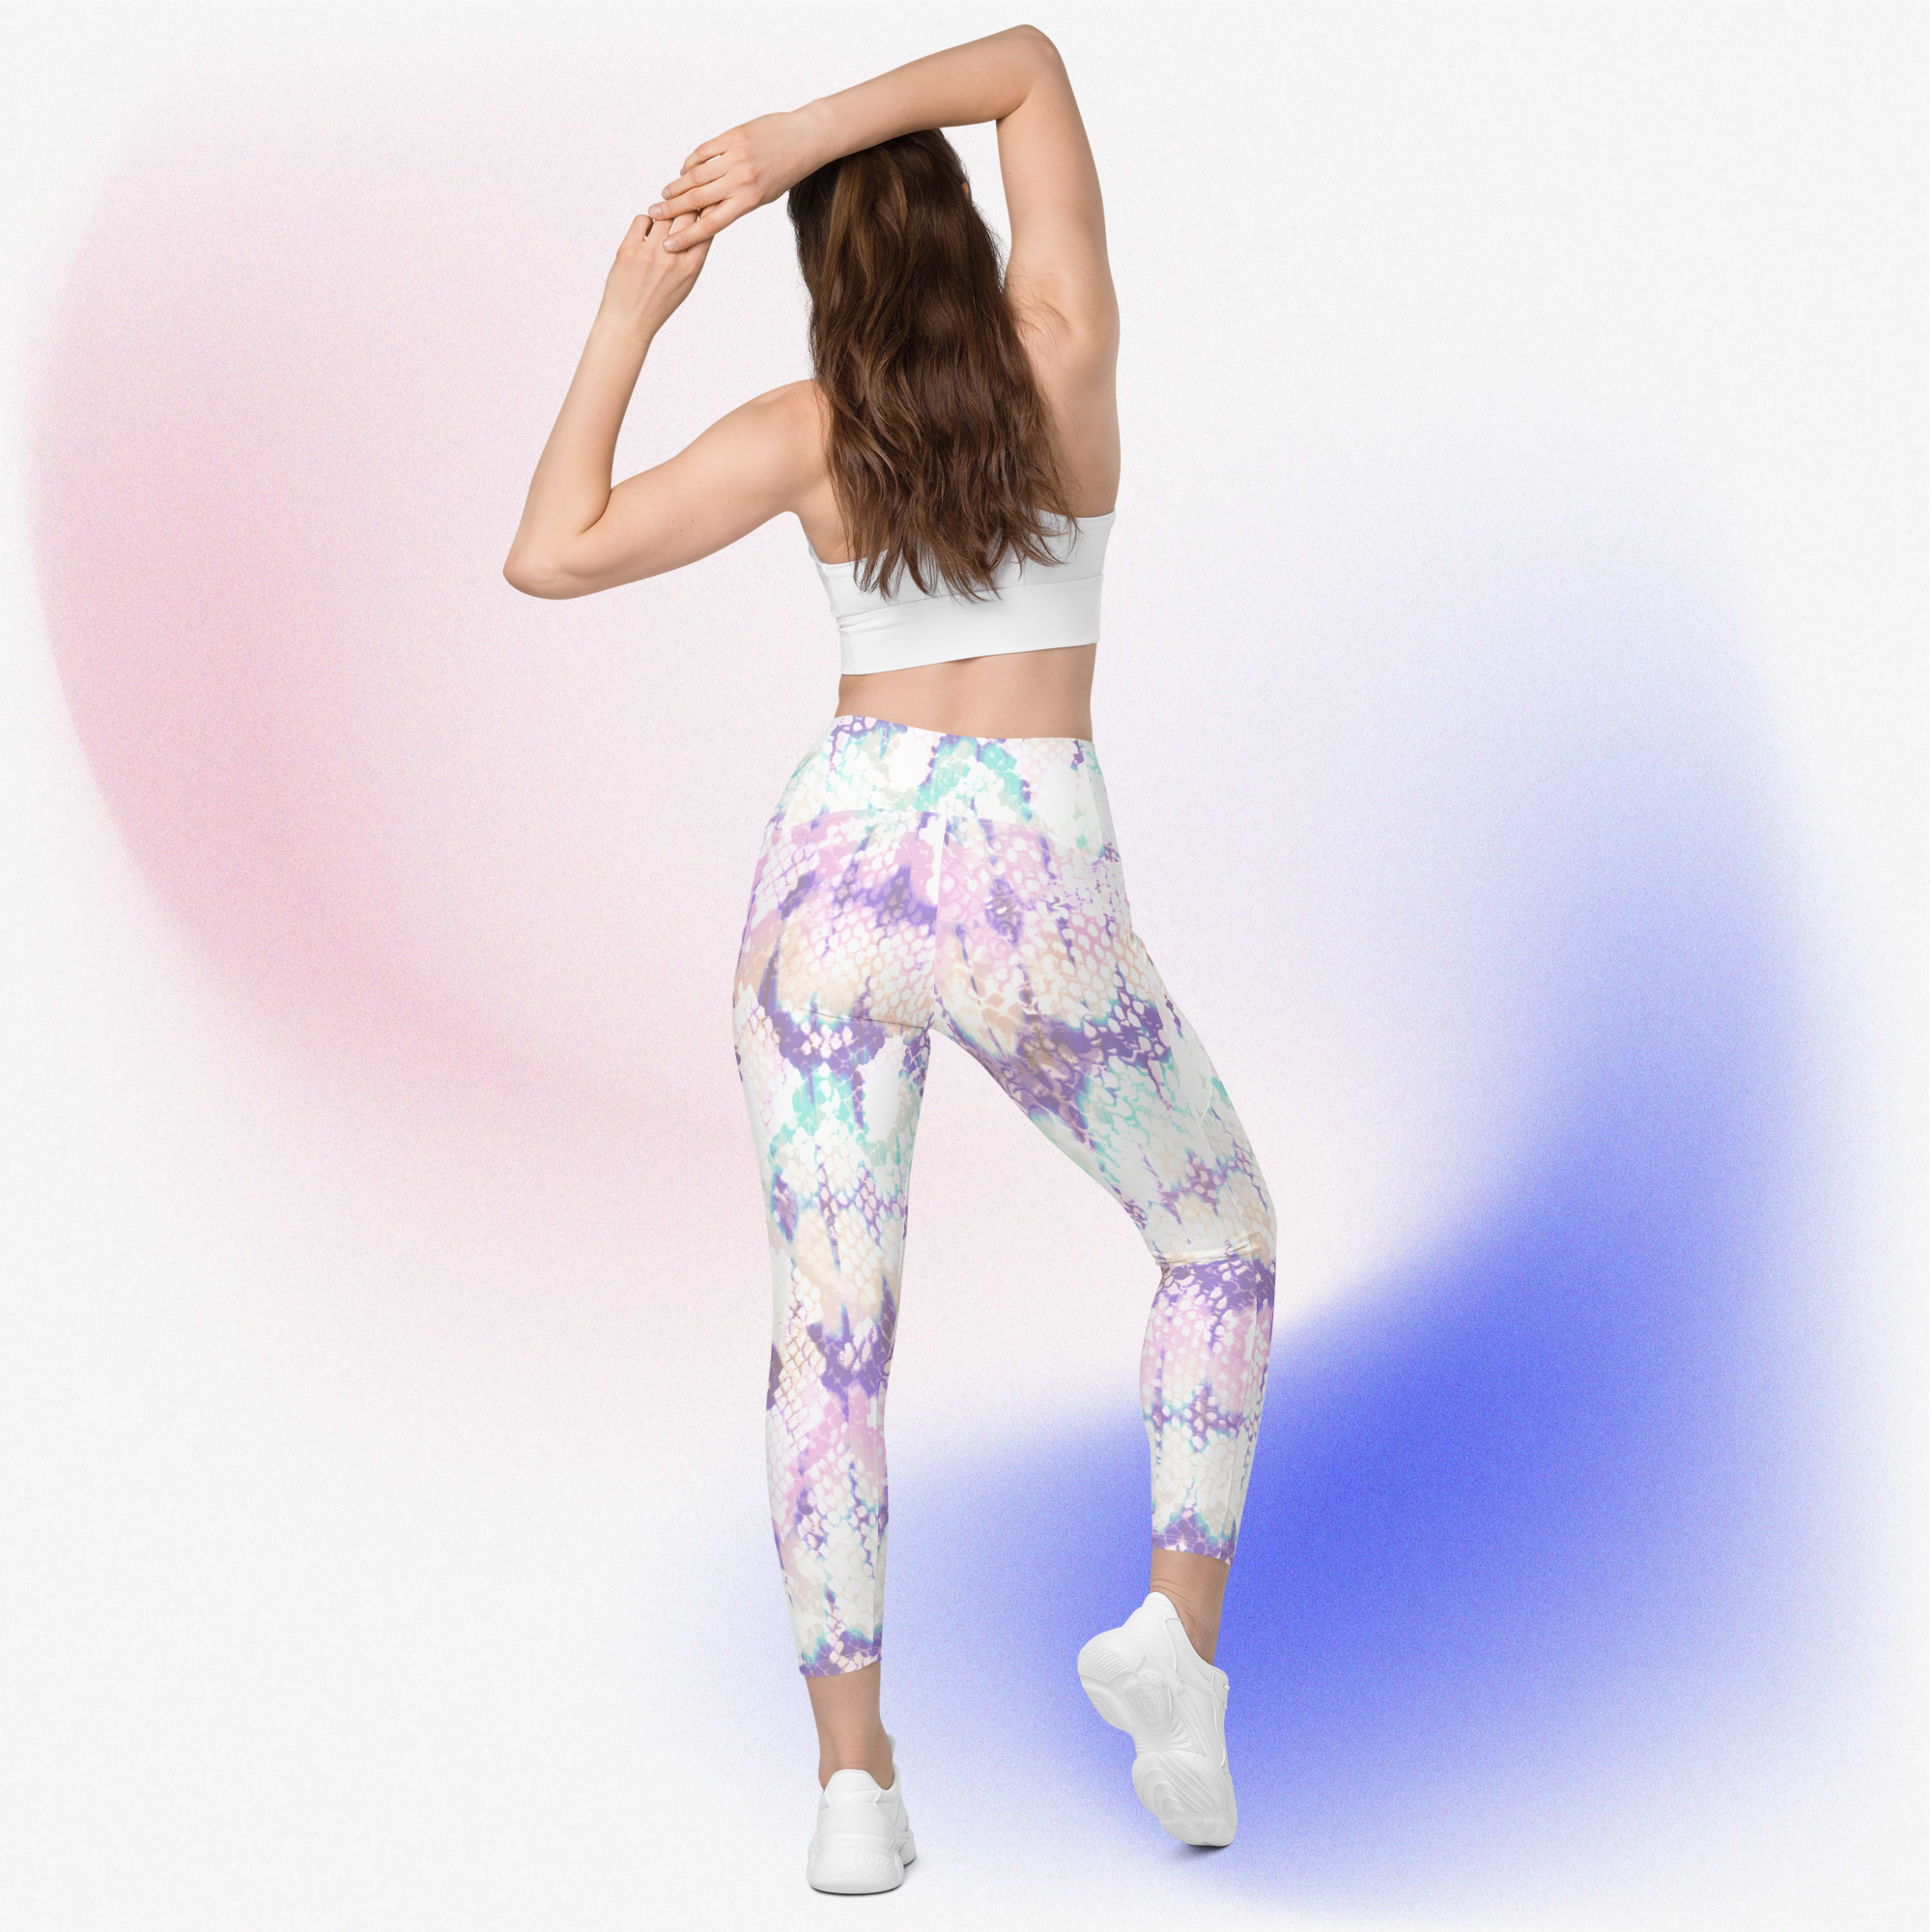 Just Dropped! Chakra 7 Leggings with pockets